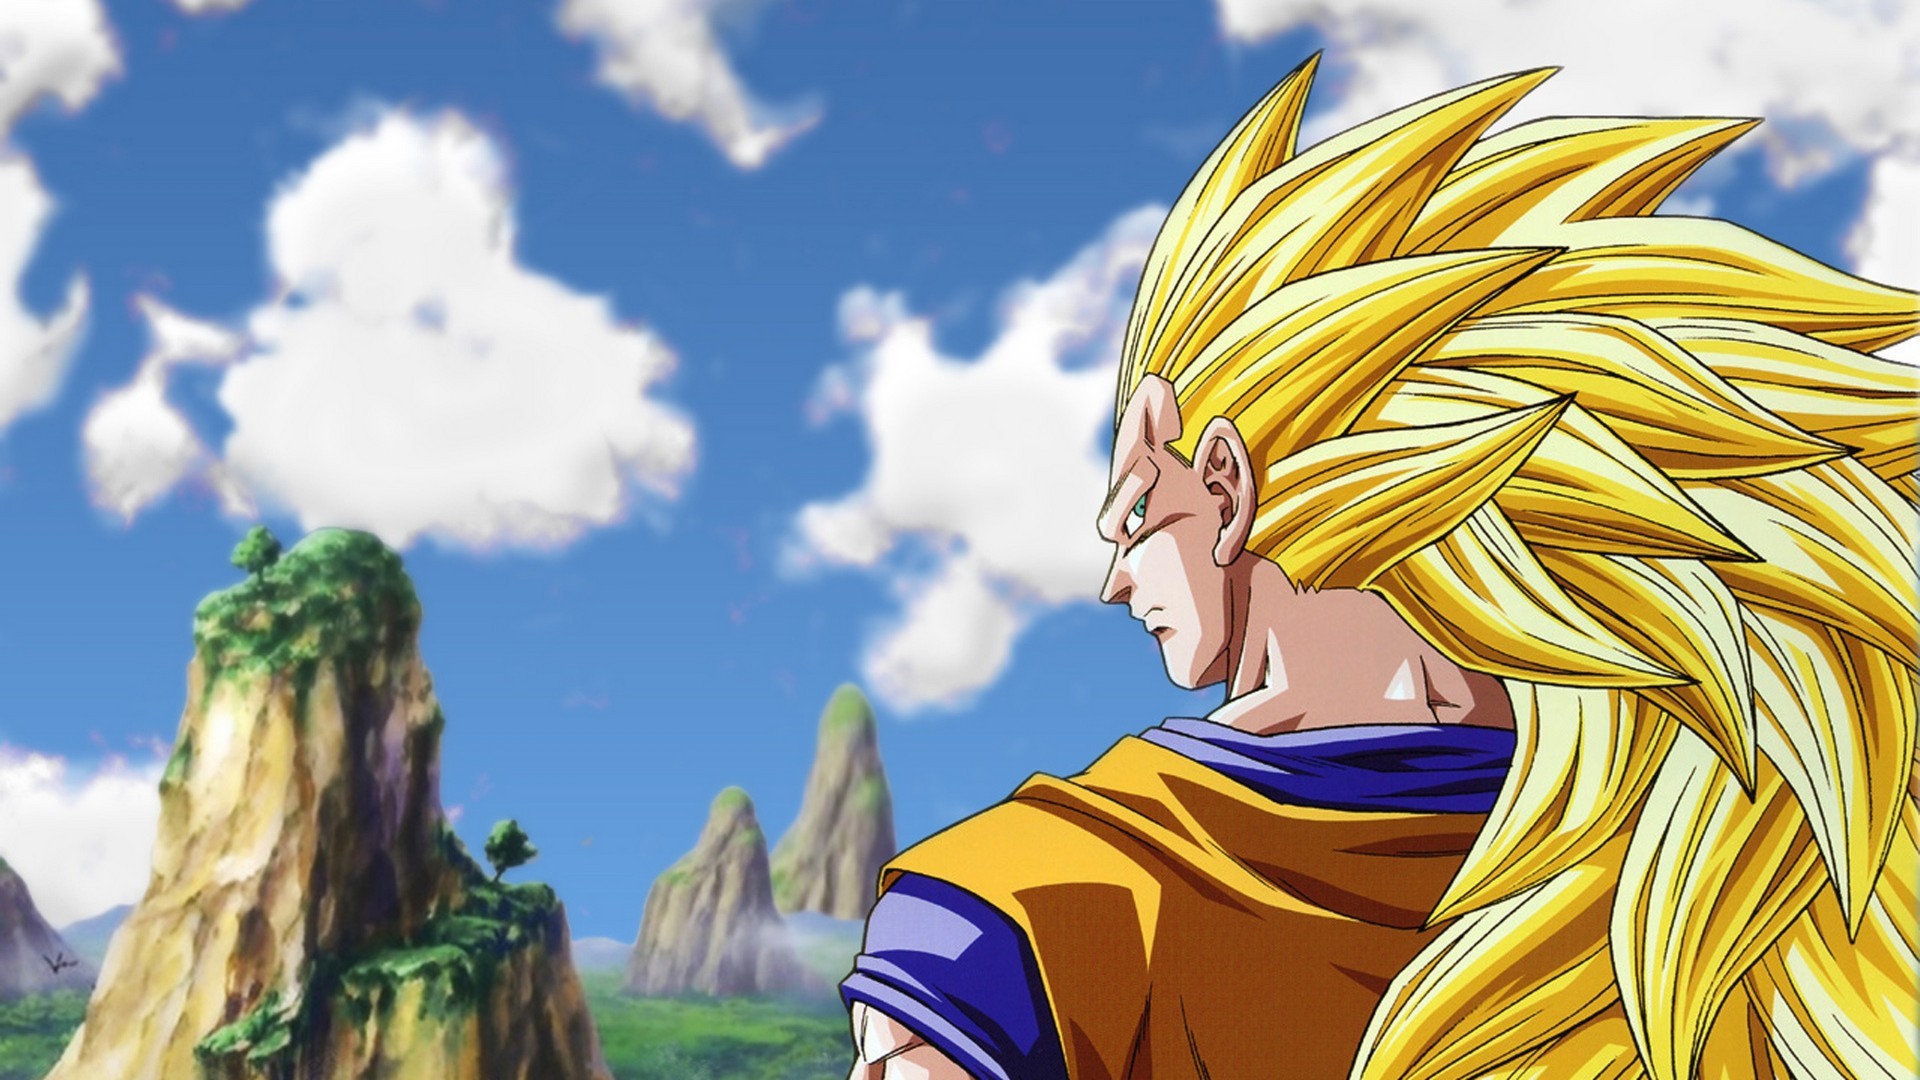 Best Goku SSJ3 Wallpaper with image resolution 1920x1080 pixel. You can use this wallpaper as background for your desktop Computer Screensavers, Android or iPhone smartphones